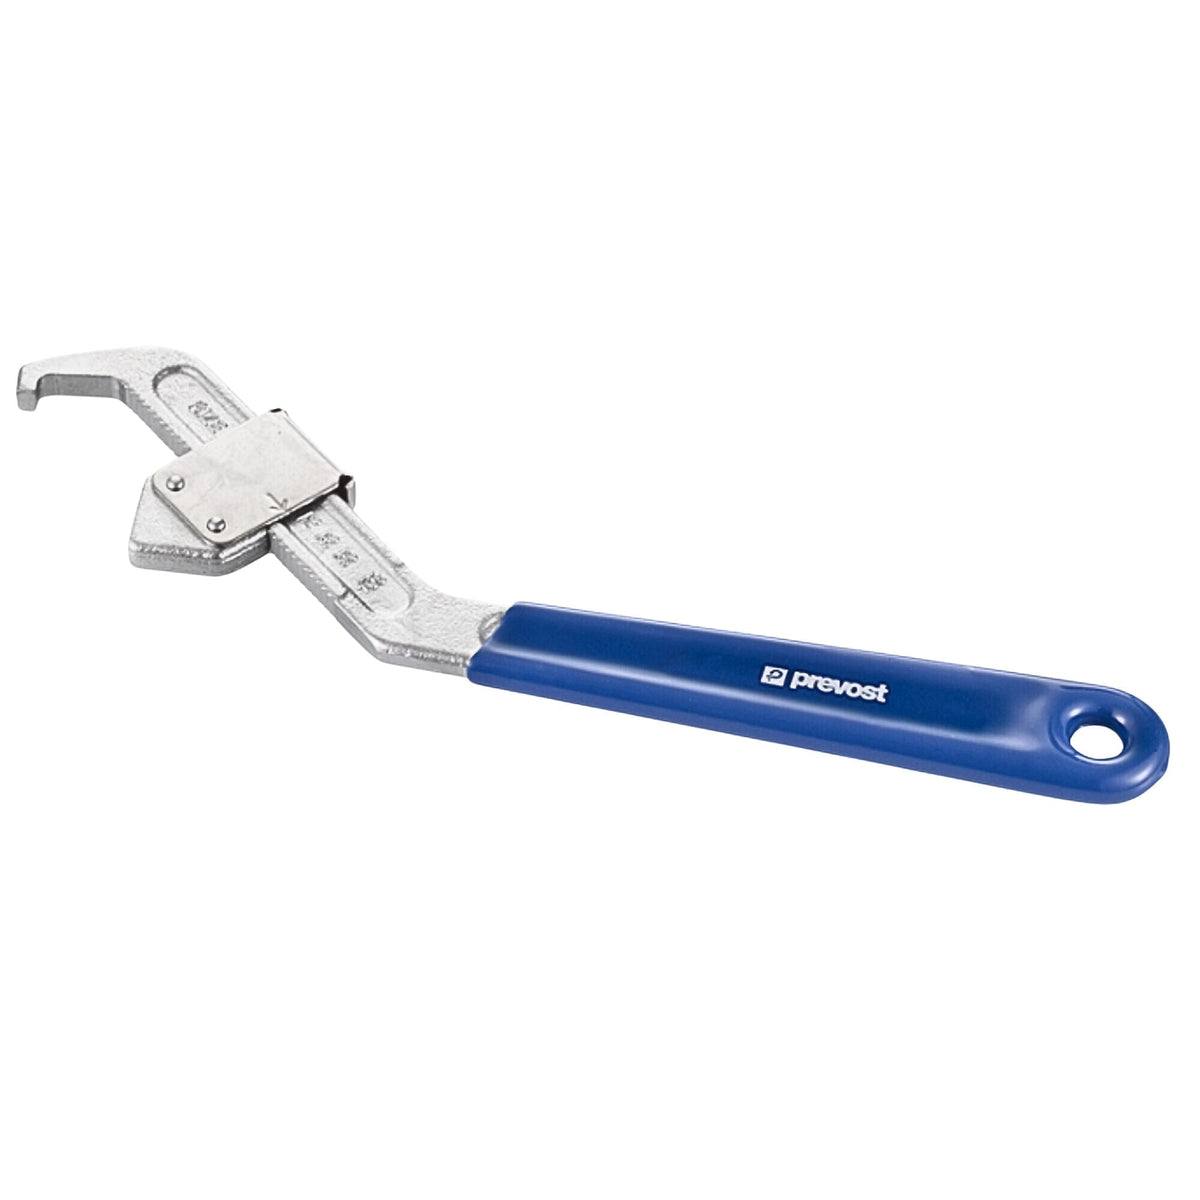 PPS CLESTD - Neutral hook spanner used on prevos1 product line